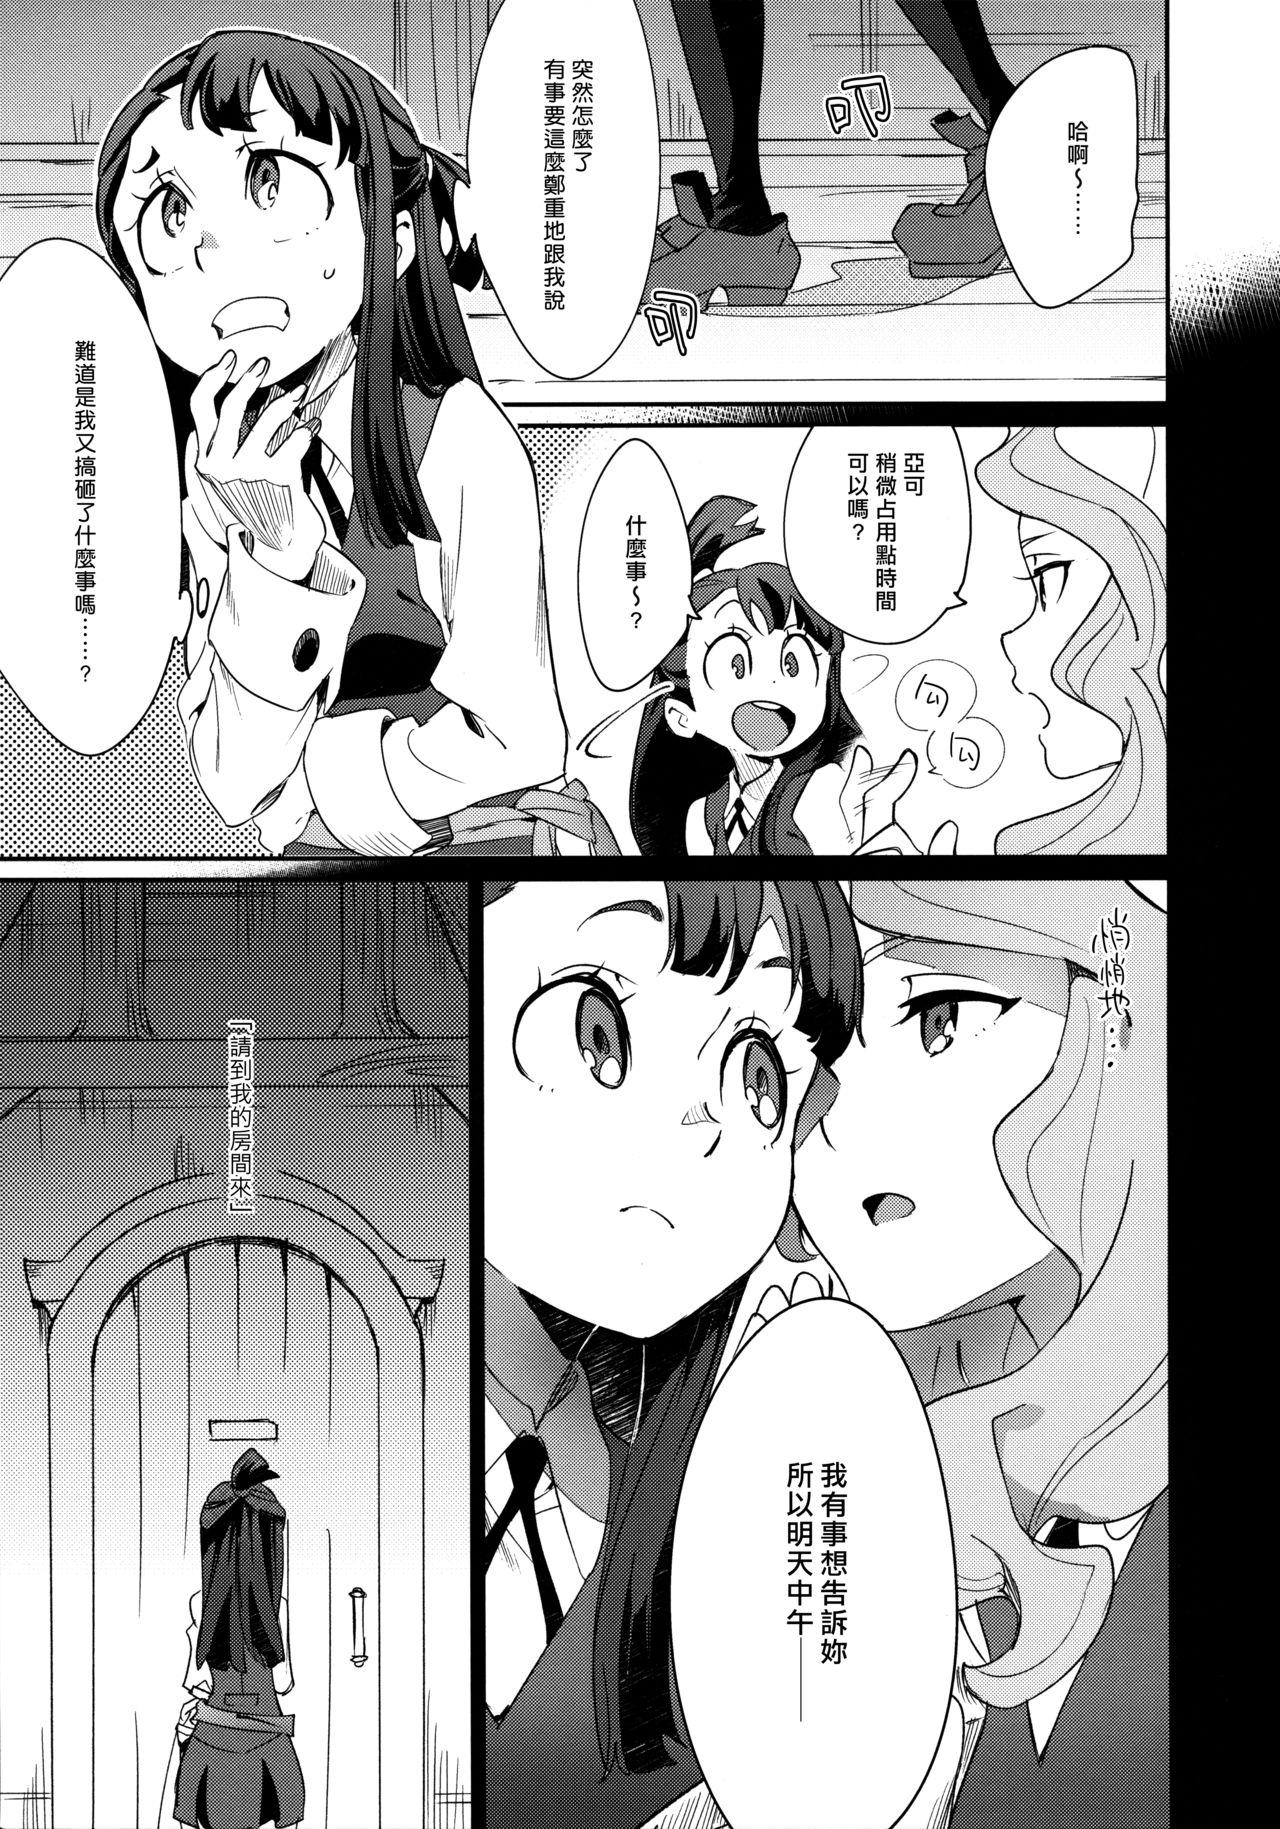 Stepmother xxx - Little witch academia Hard - Page 5